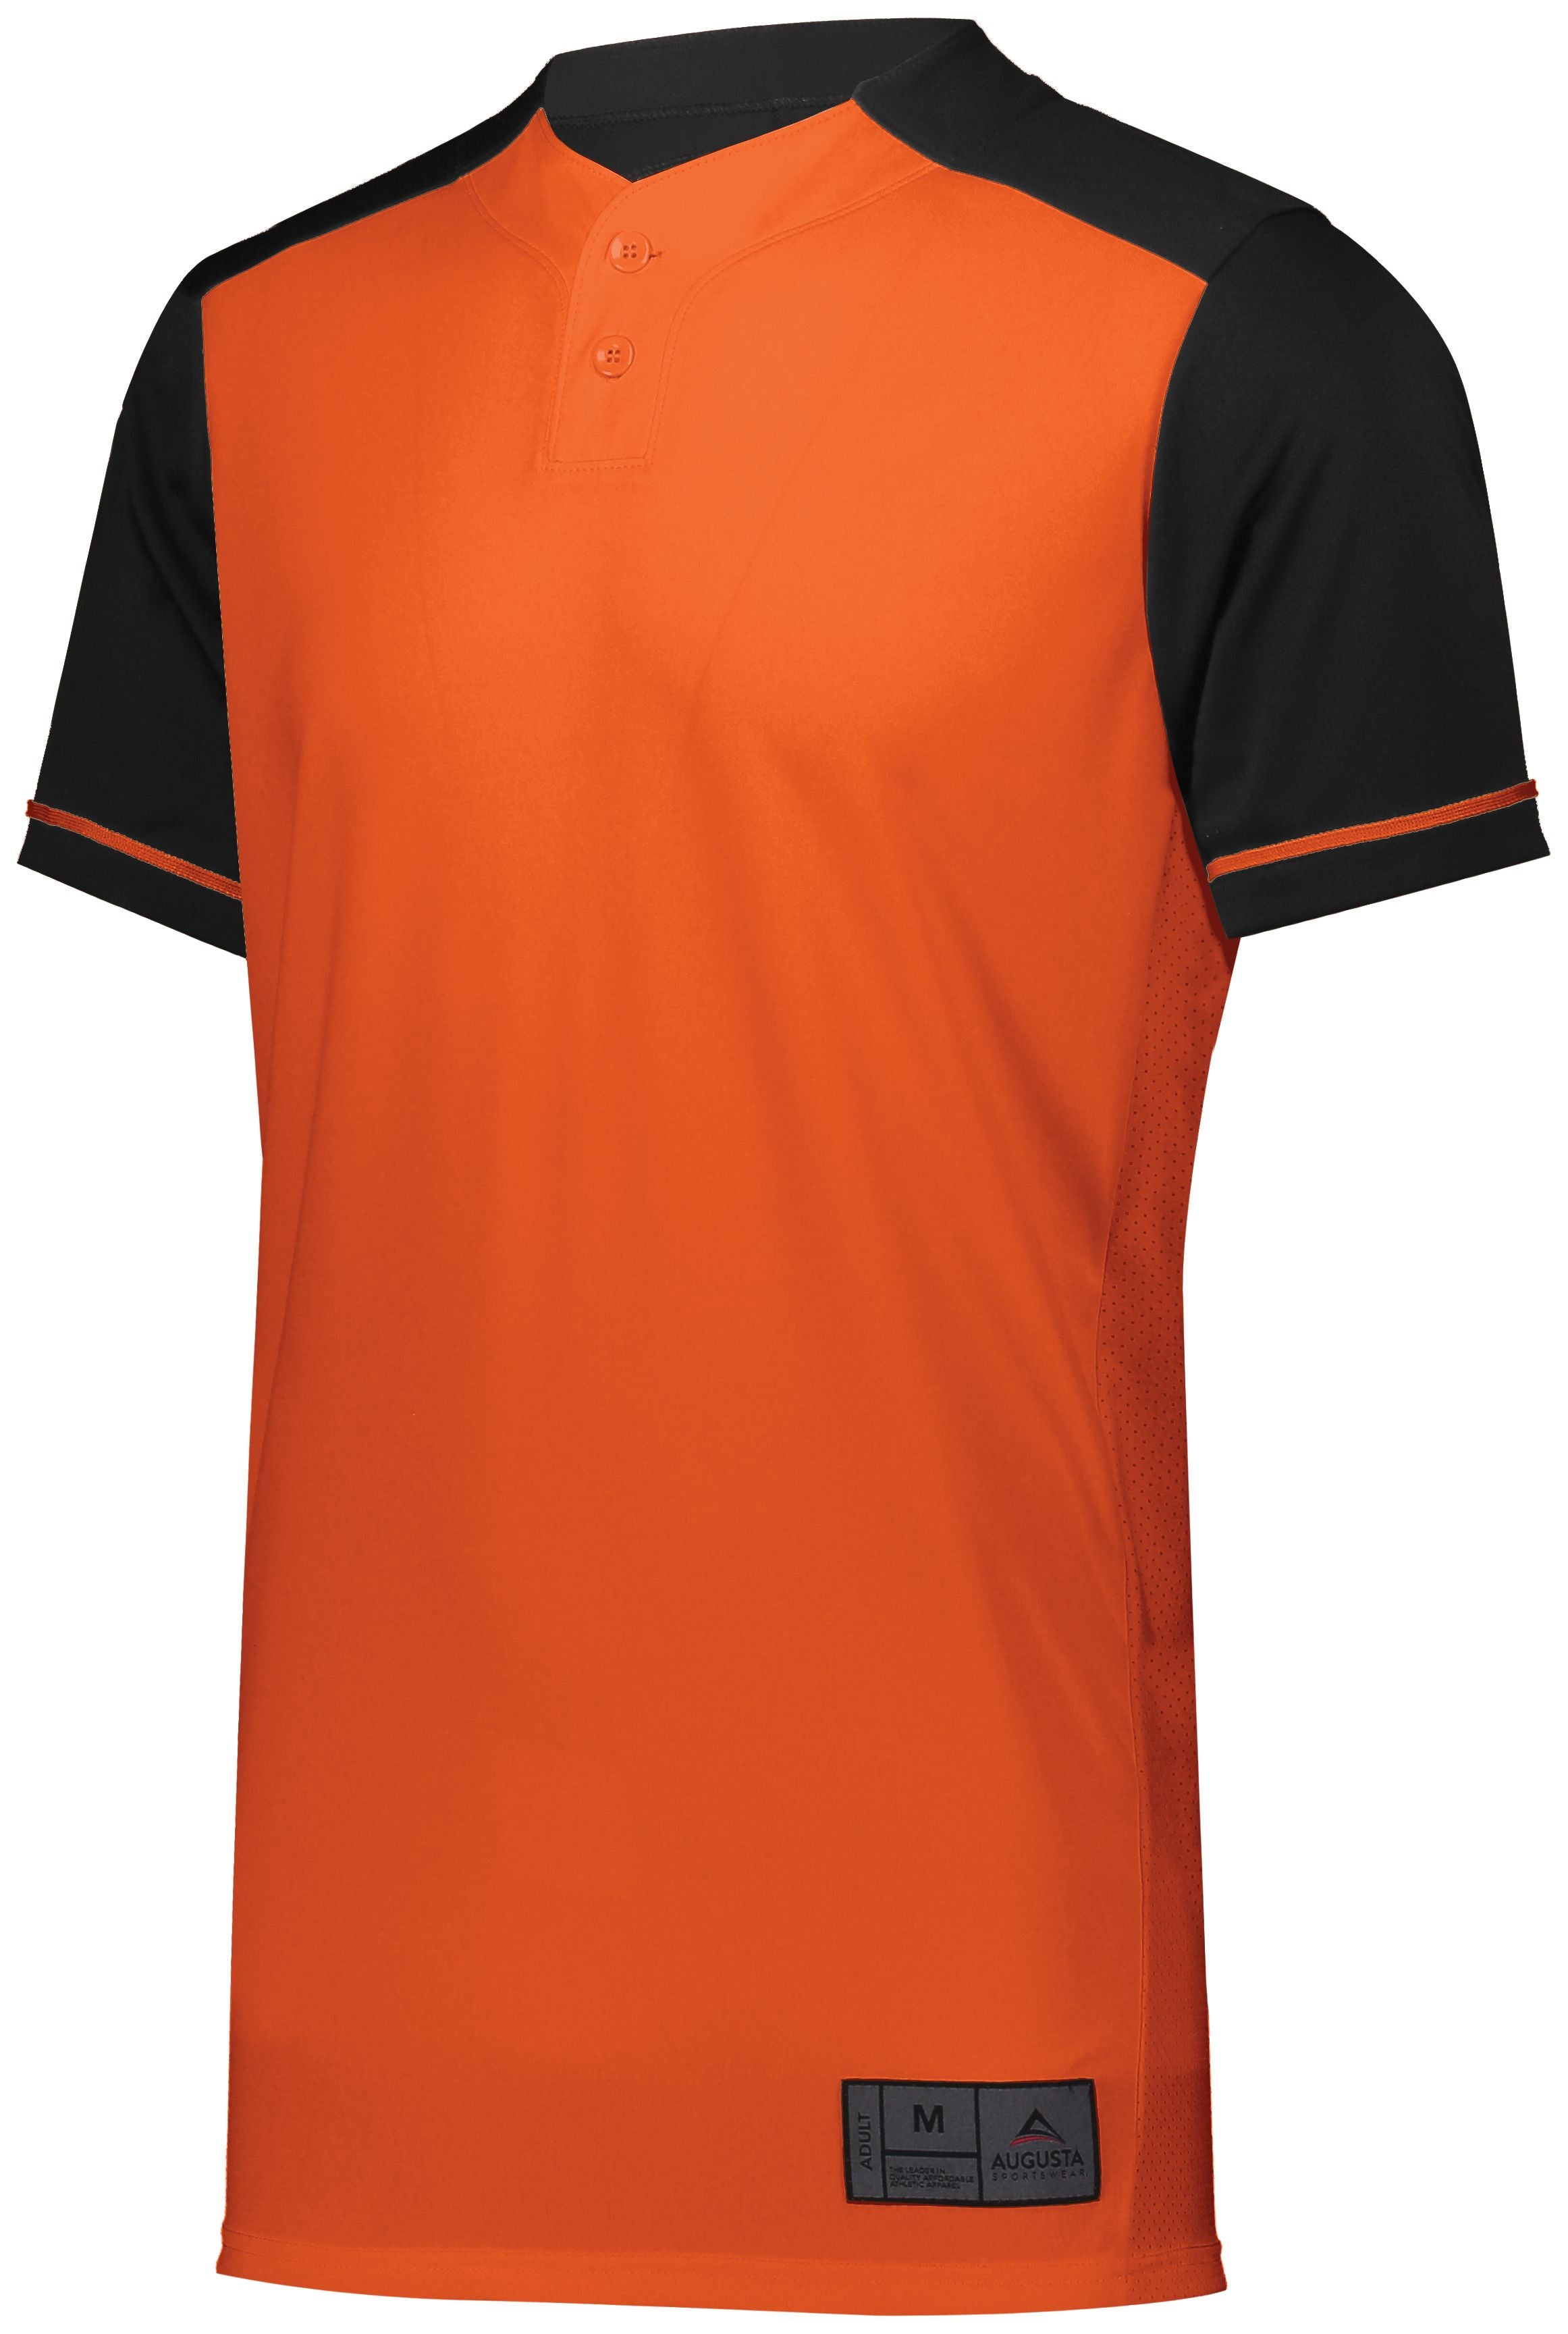 Augusta Sportswear Closer Jersey in Orange/Black  -Part of the Adult, Adult-Jersey, Augusta-Products, Baseball, Shirts, All-Sports, All-Sports-1 product lines at KanaleyCreations.com